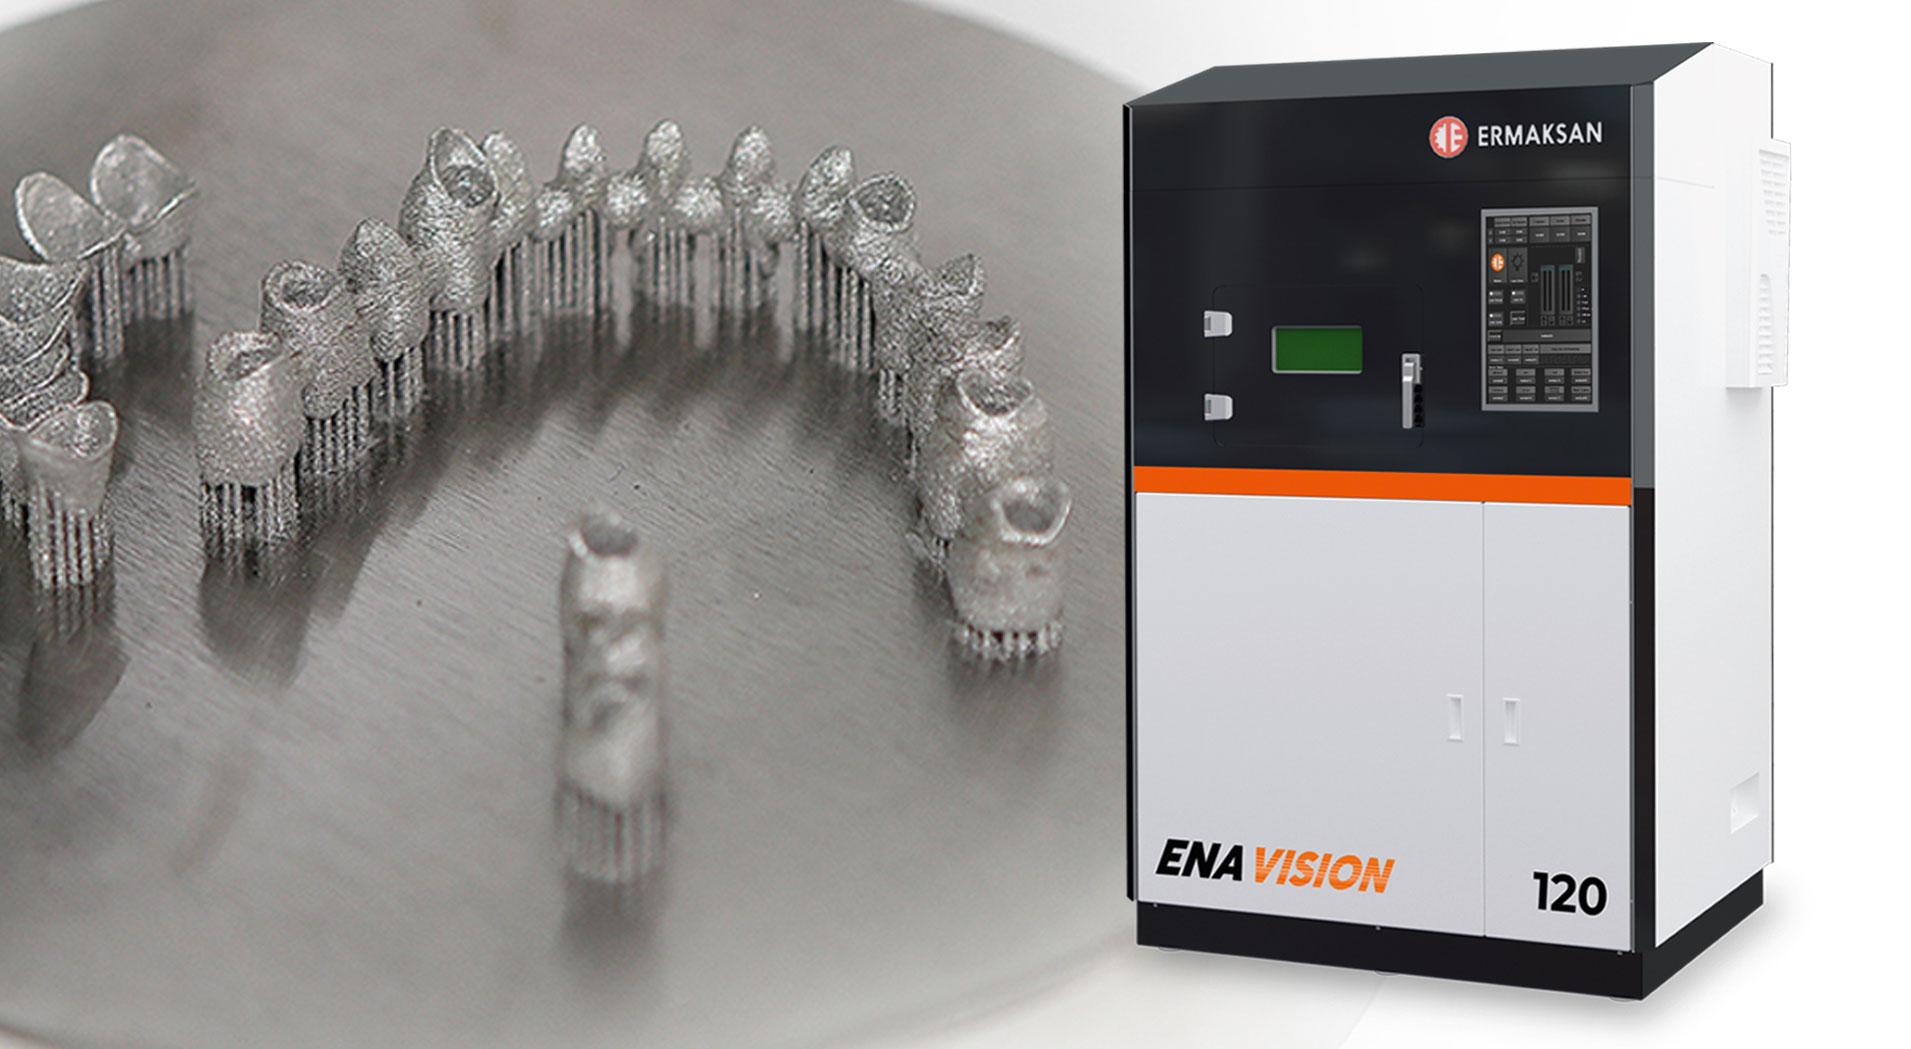 3D printer for dental industries and research institutes: ENAVISION 120